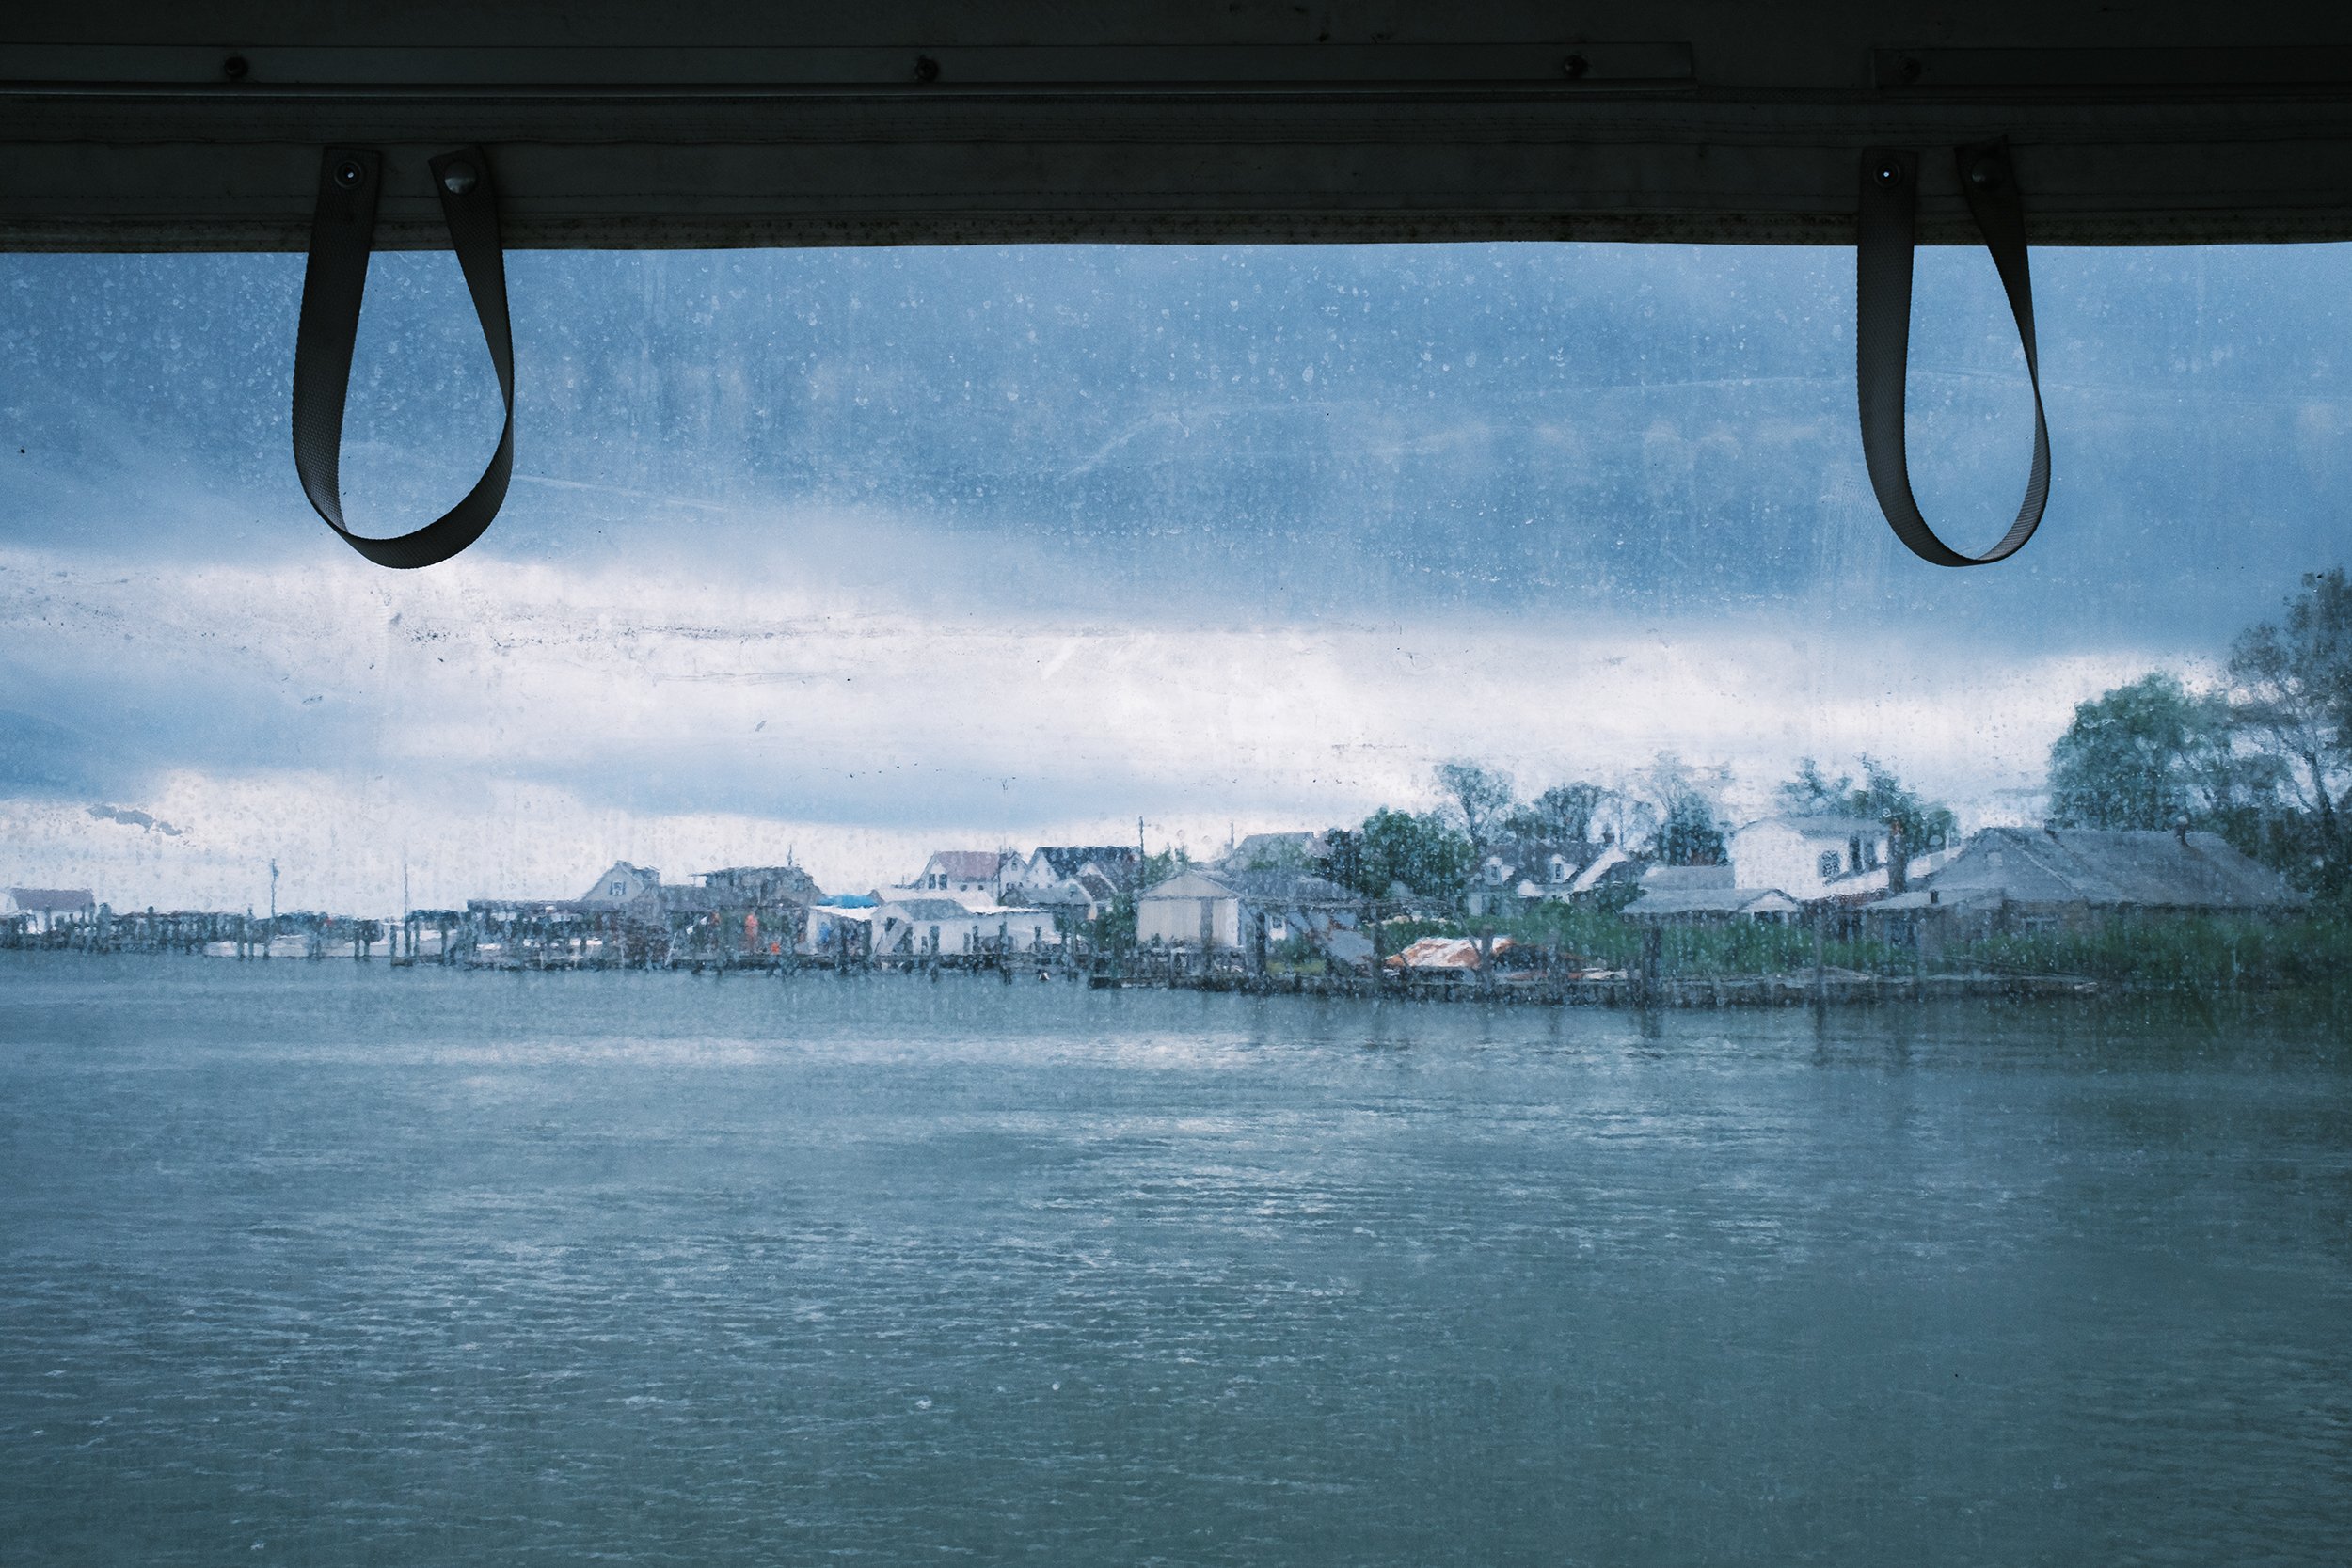  Seen from a ferry arriving at Smith Island, docks and crab shanties lead to homes of watermen and their families in one of the last island communities in the Chesapeake Bay. 